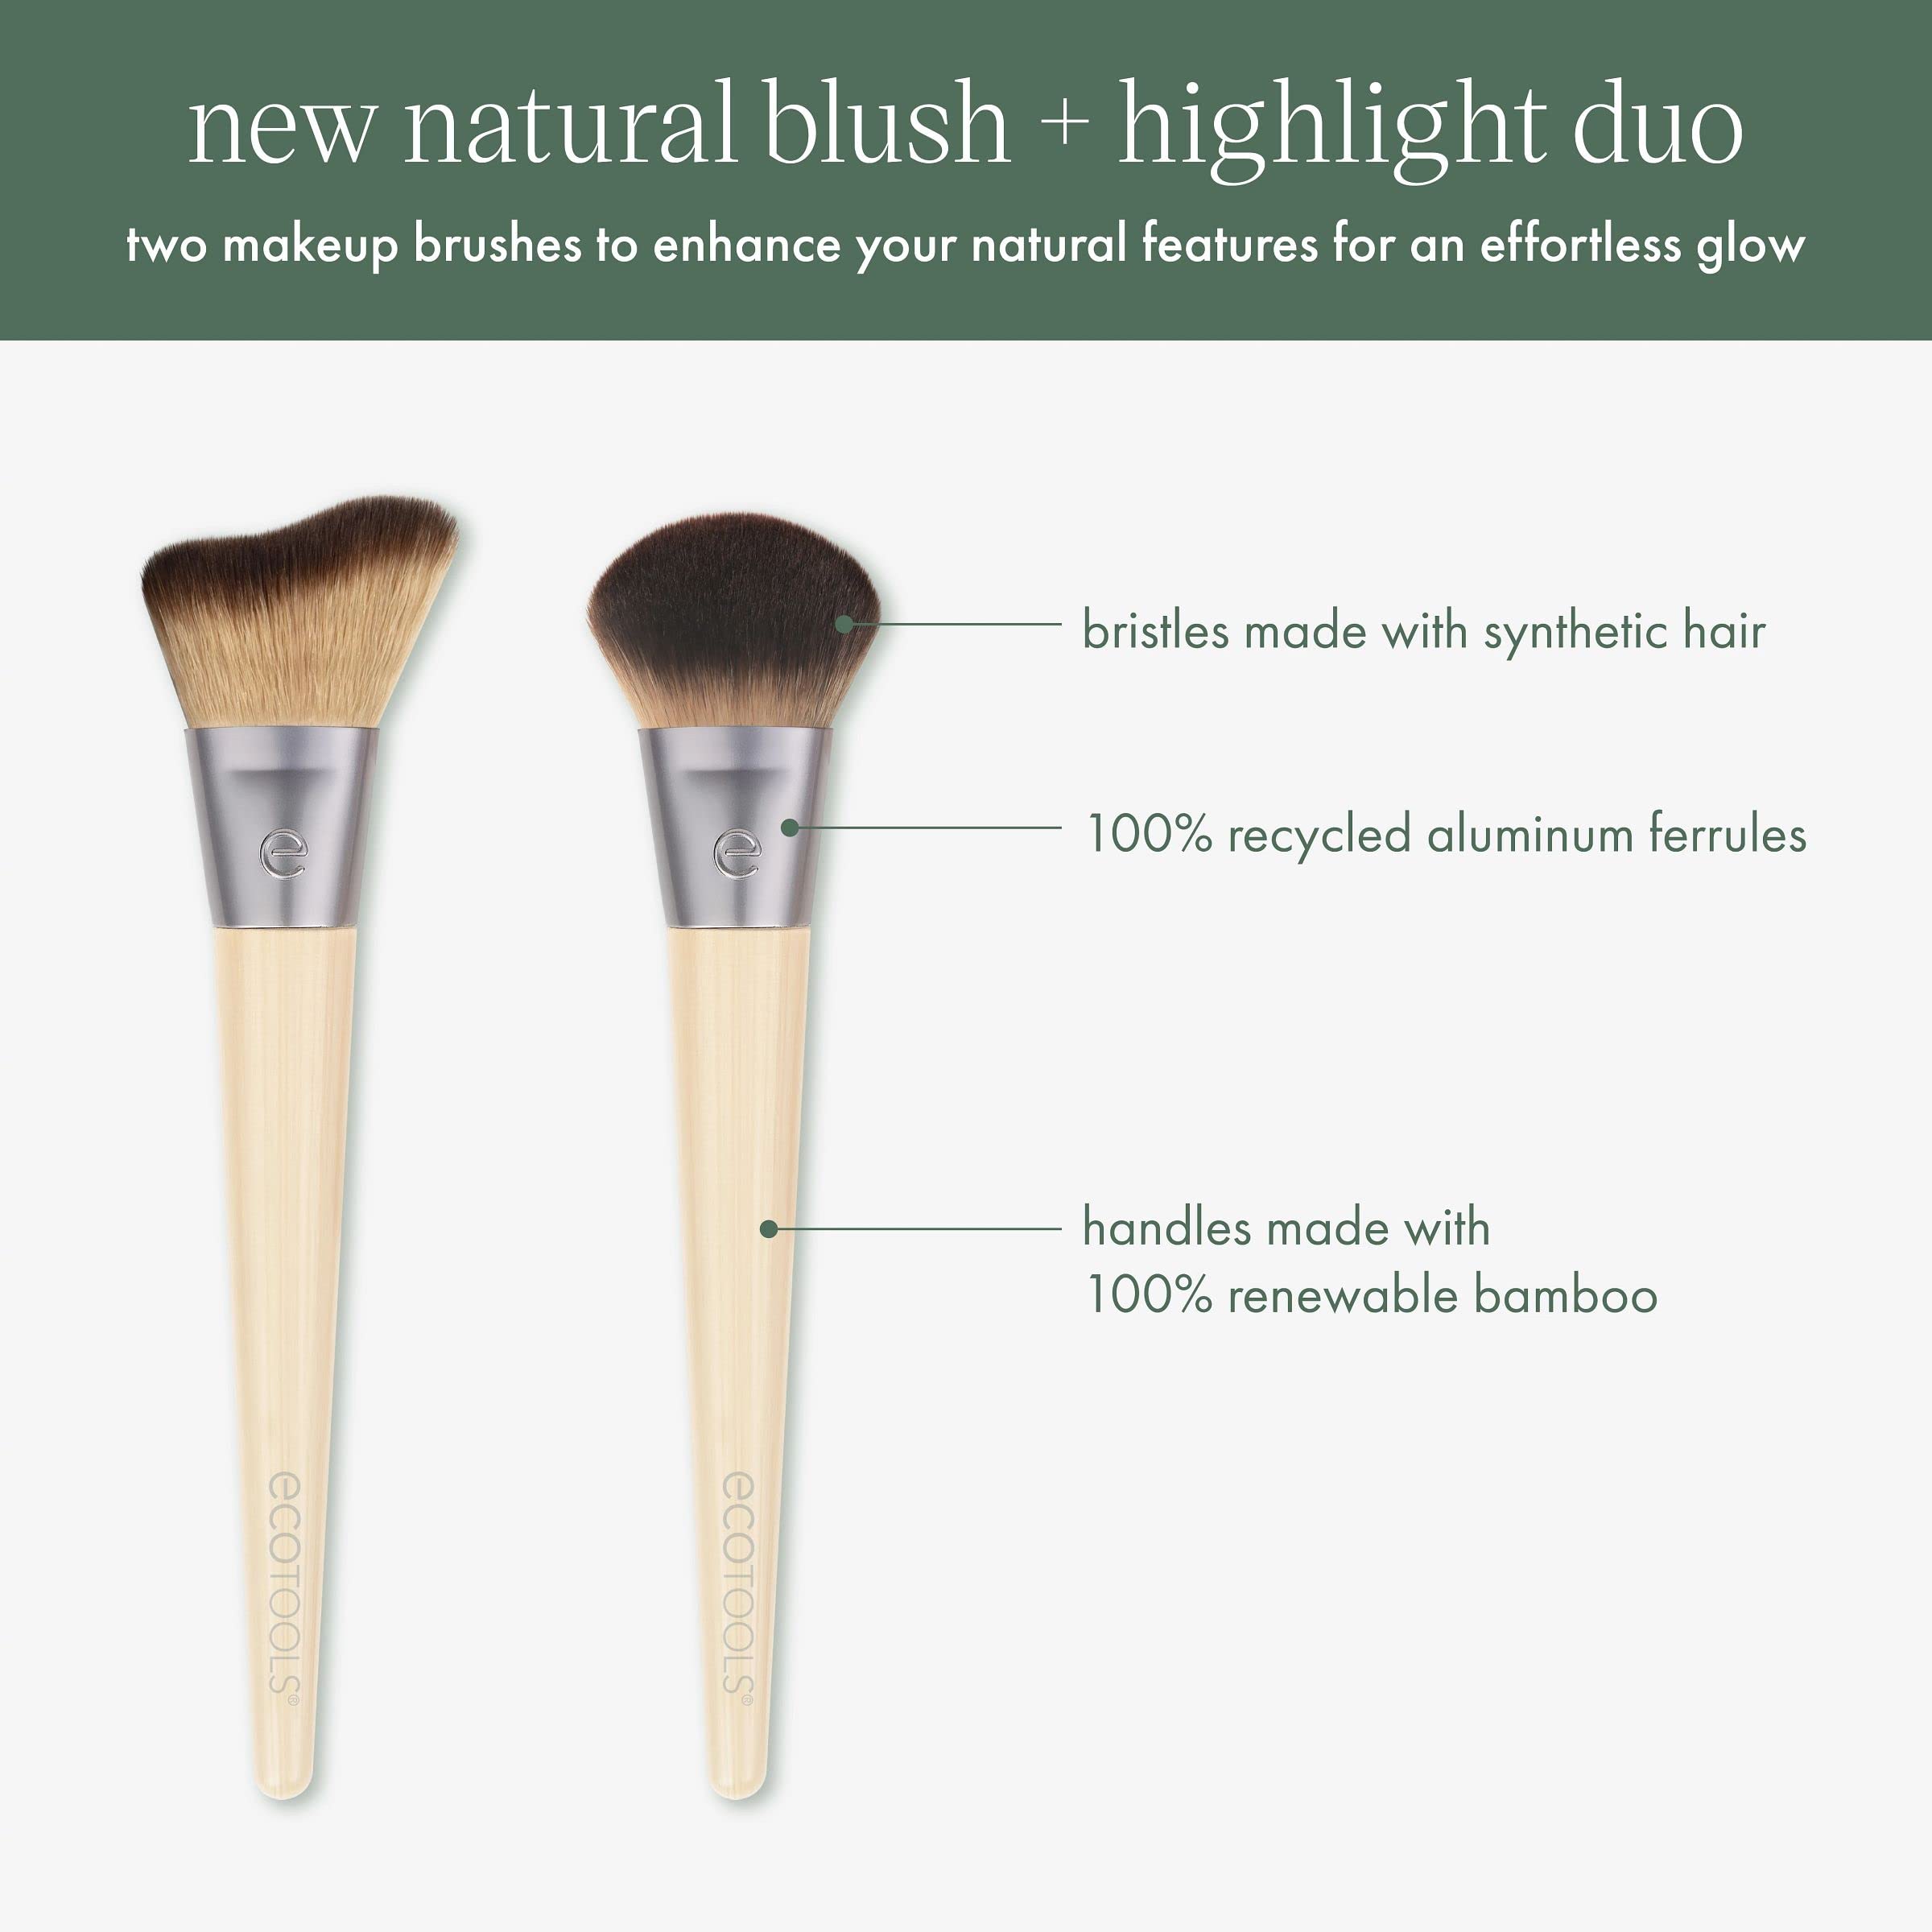 EcoTools New Natural Blush & Highlight Duo, Face Makeup Brushes For Powder Makeup, Dense, Synthetic Bristles For Enhancing Skin, Vegan & Cruelty-Free, 2 Count